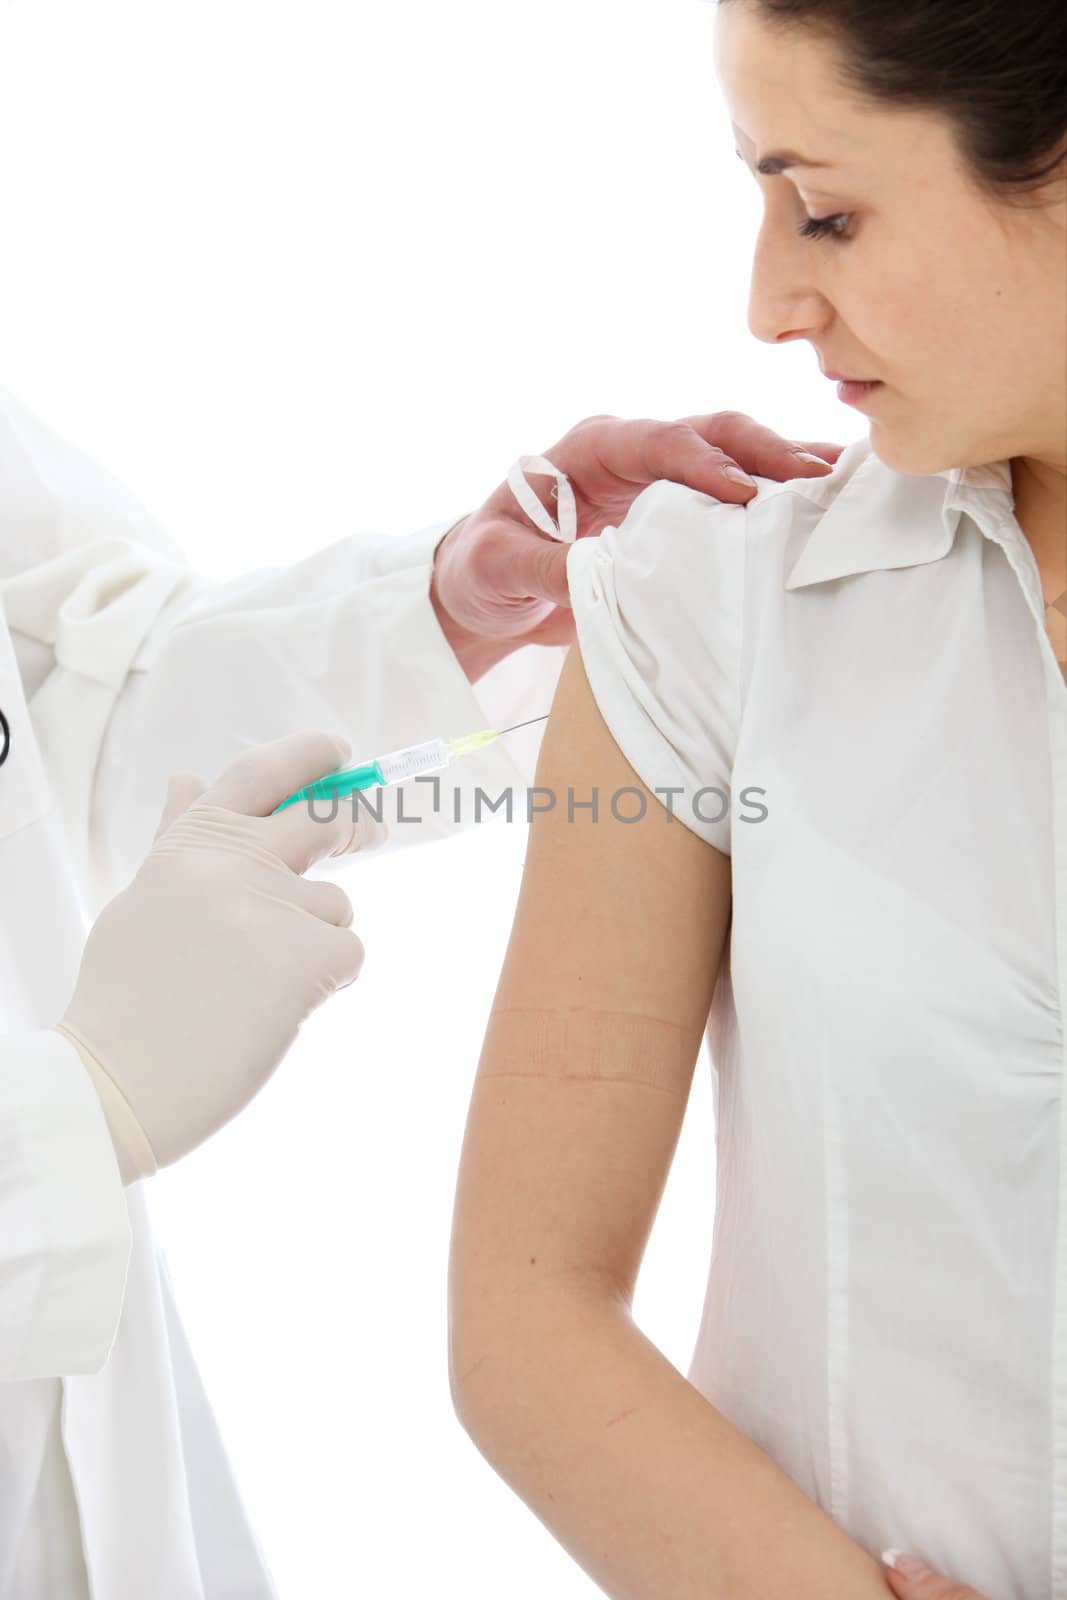 Female patient receiving an intramuscular injection in her upper arm isolated on white